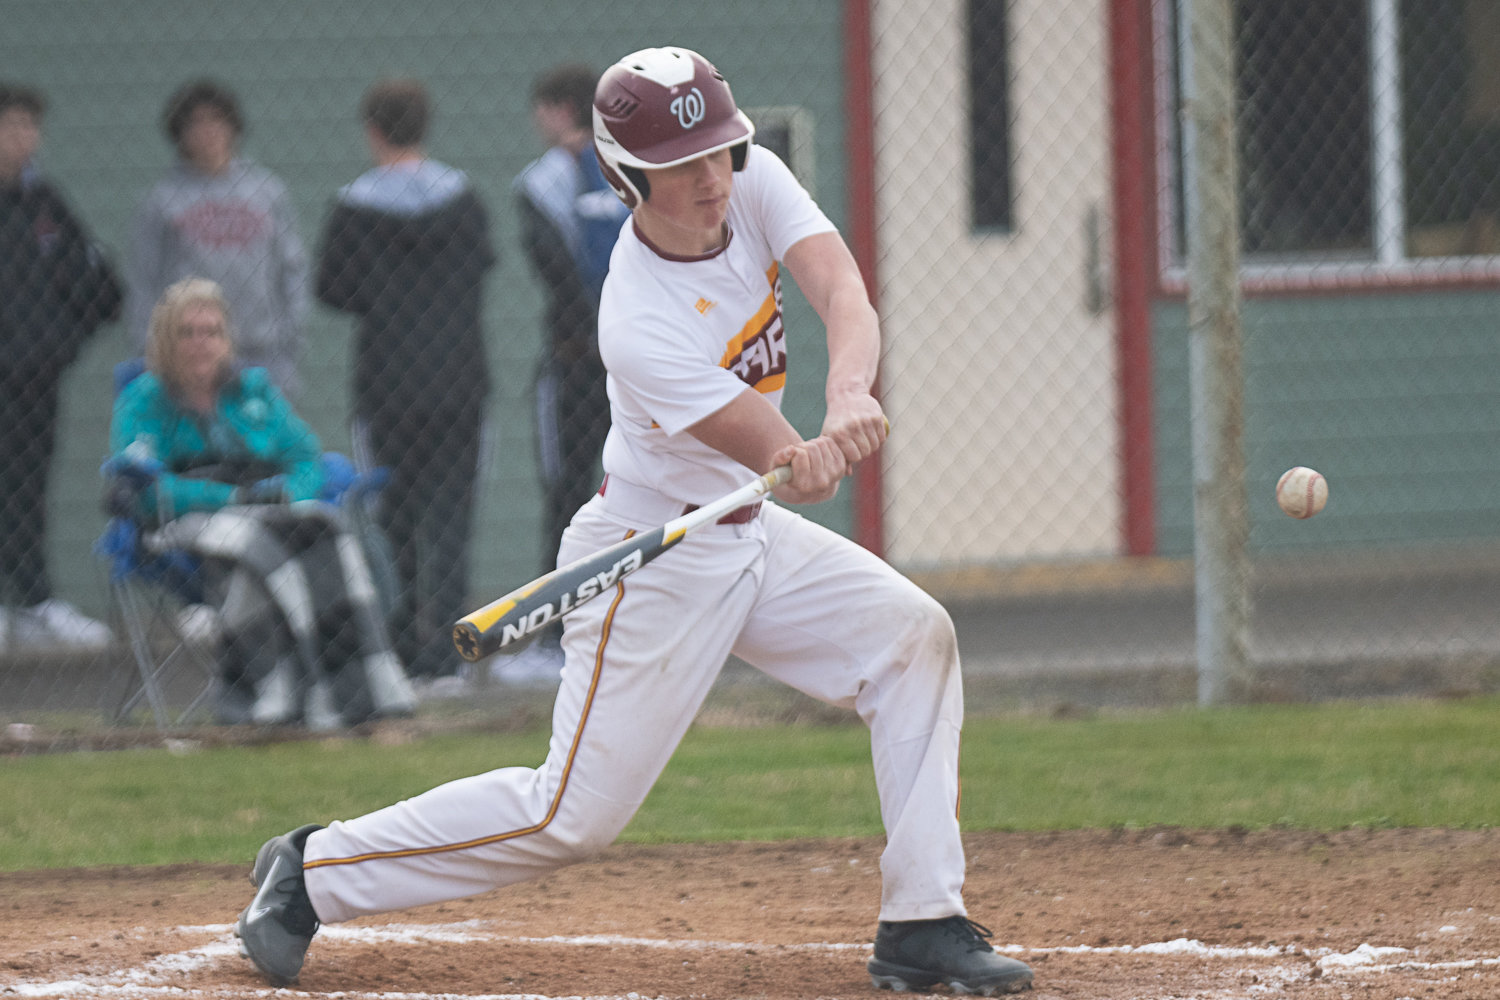 James Cusson gets out in front but manages to lace an RBI single during Winlock's game against MWP on March 27.